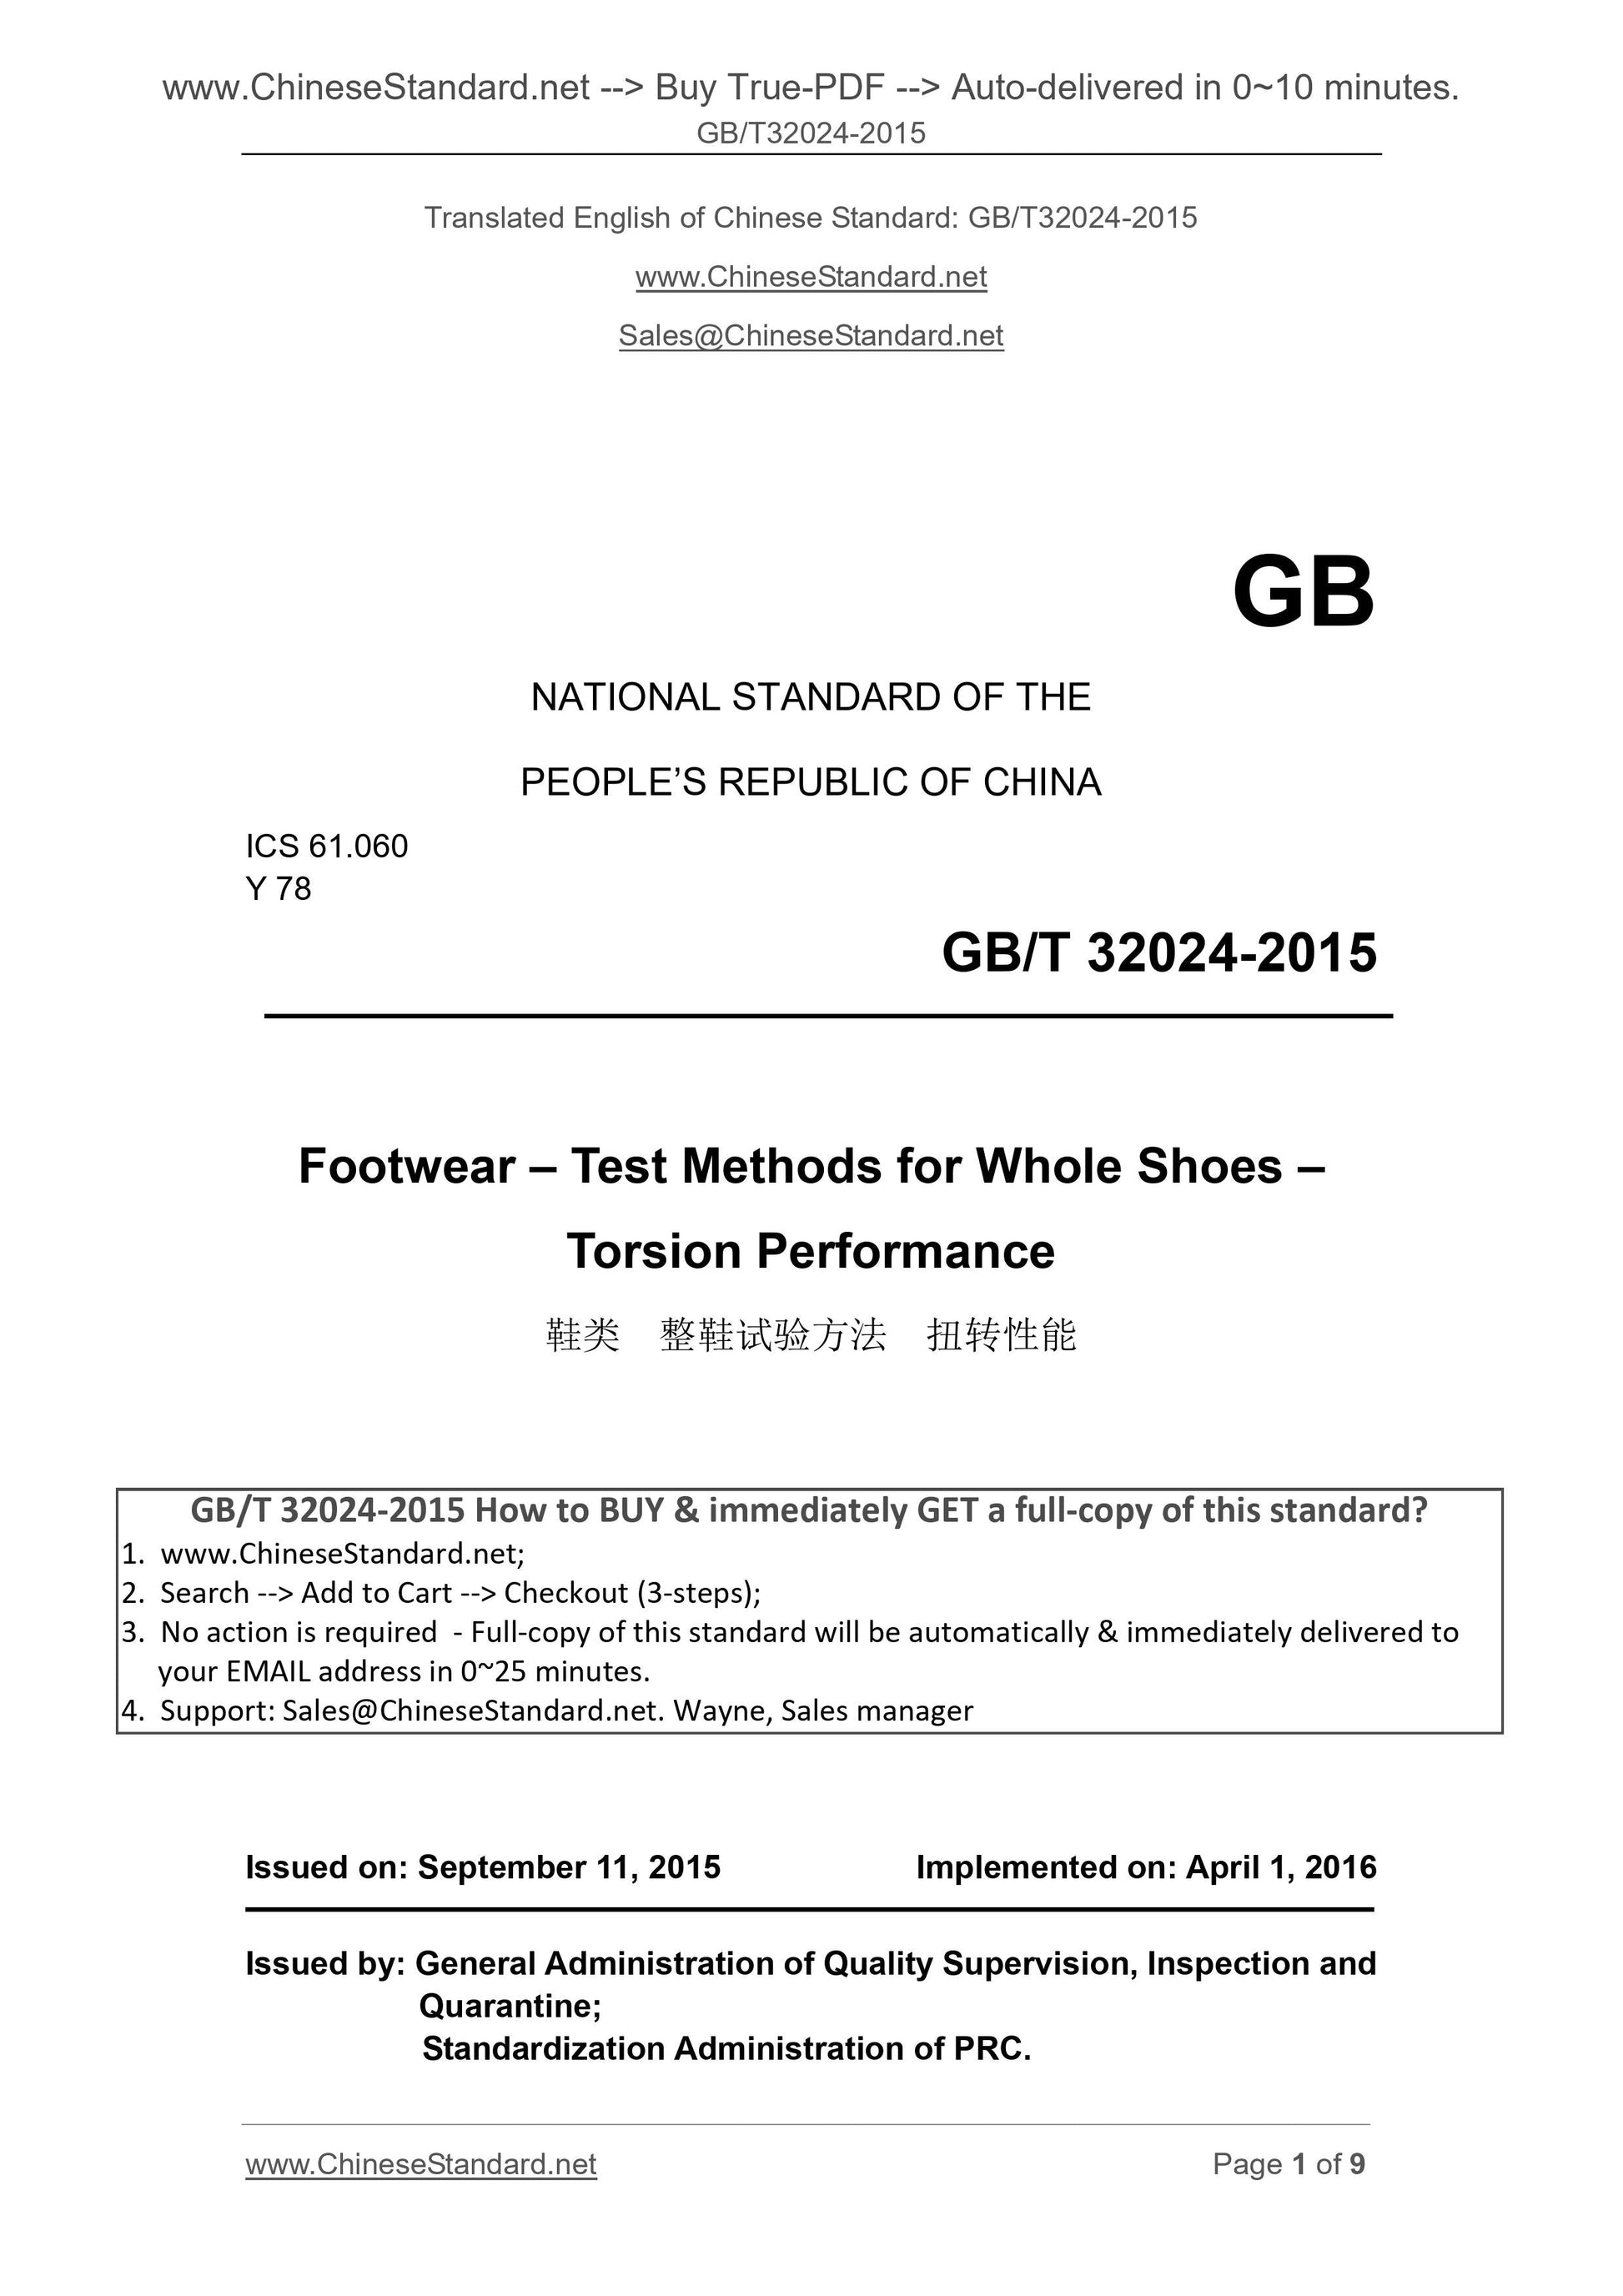 GB/T 32024-2015 Page 1